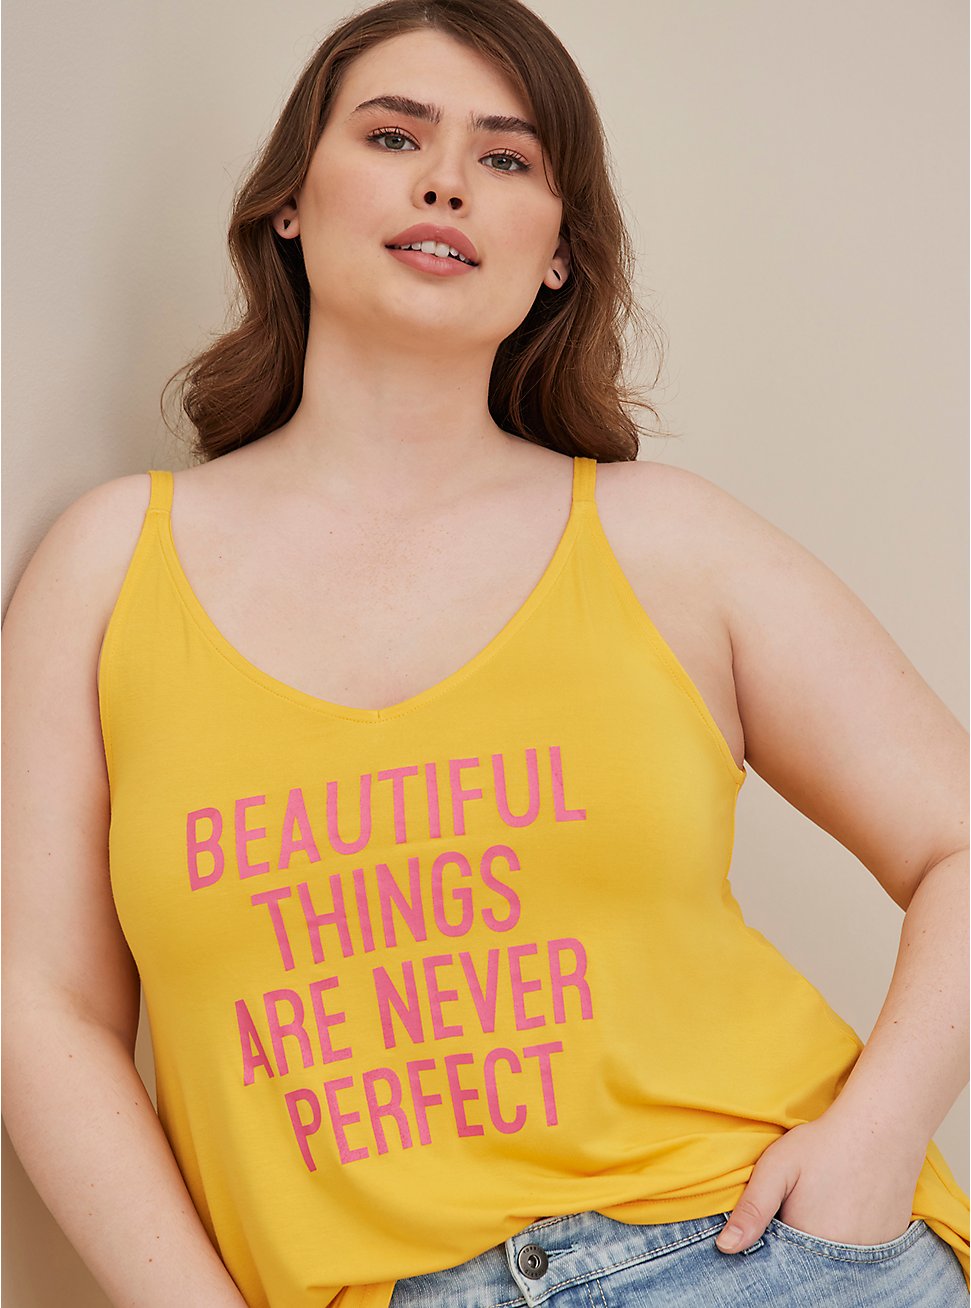 Plus Size Easy Tank - Super Soft Beautiful Yellow, , hi-res